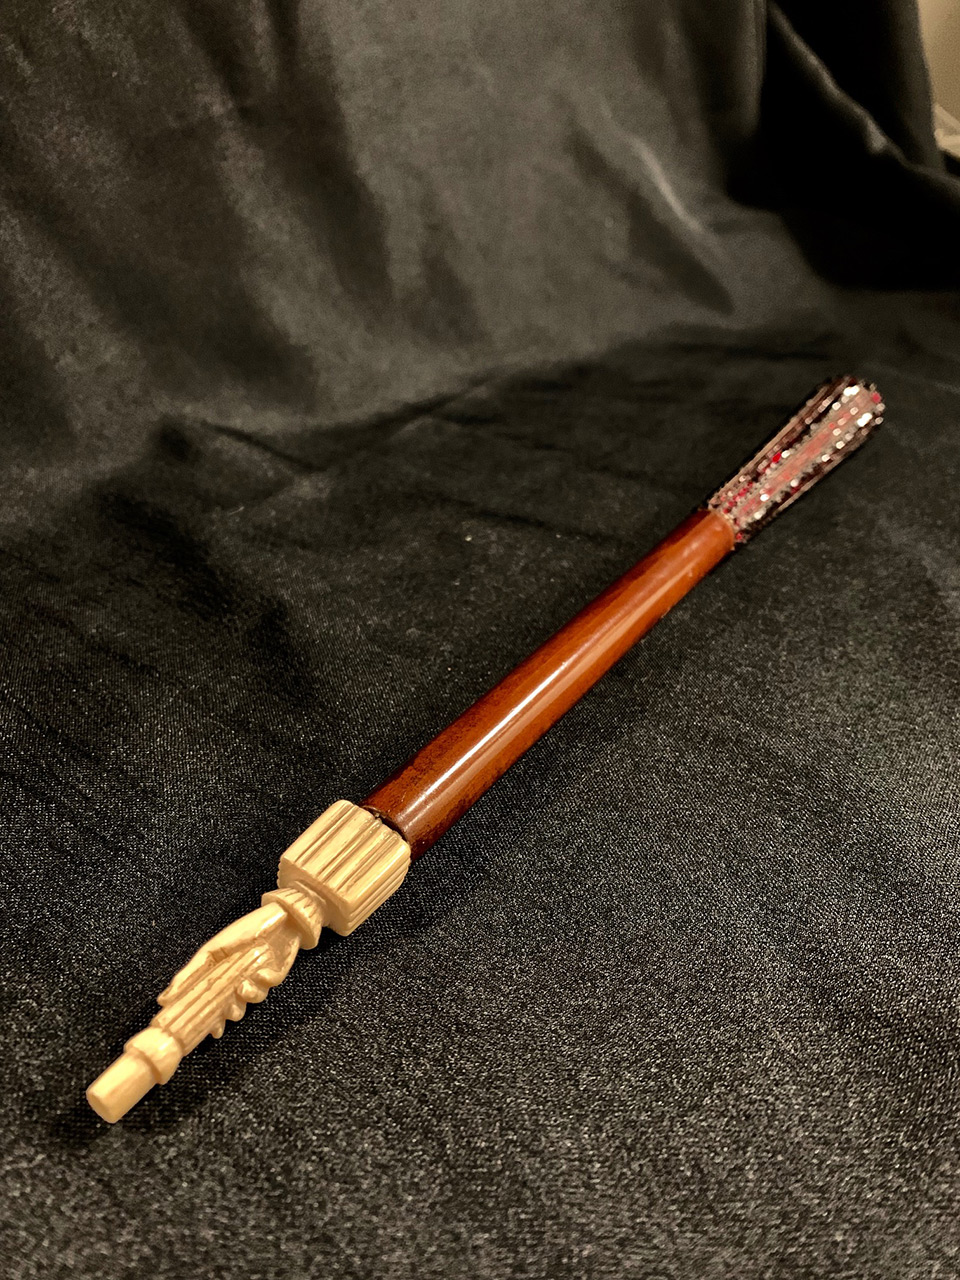 The baton purportedly used by Richard Wagner to conduct his first performance of Beethoven’s Ninth Symphony in Vienna in 1843. The baton’s tip features an ivory carving of a hand holding a scroll.